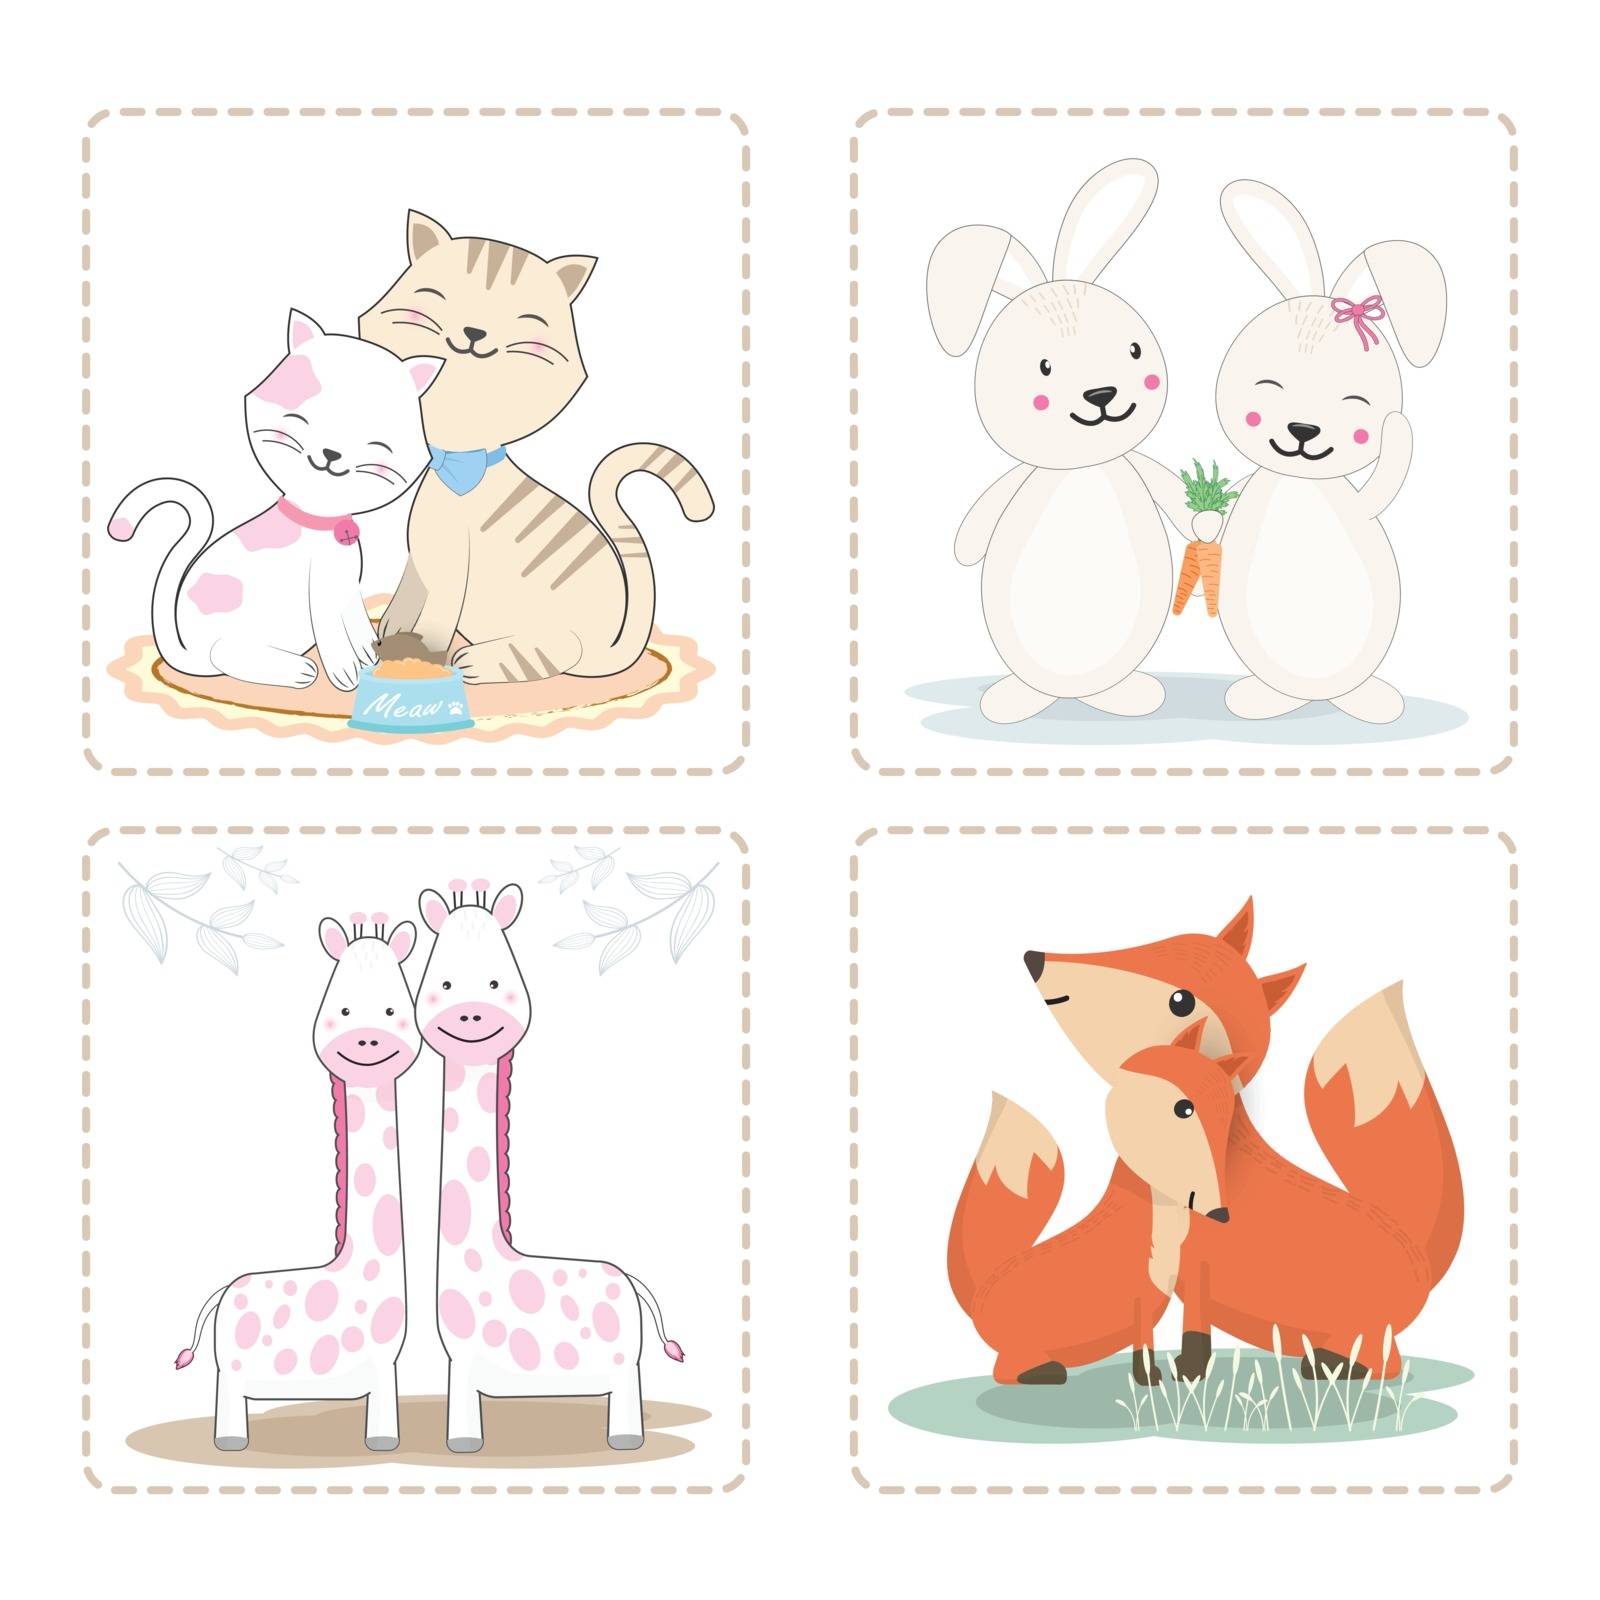 Set of cute animal couple cartoon character icon illustration by Kheat